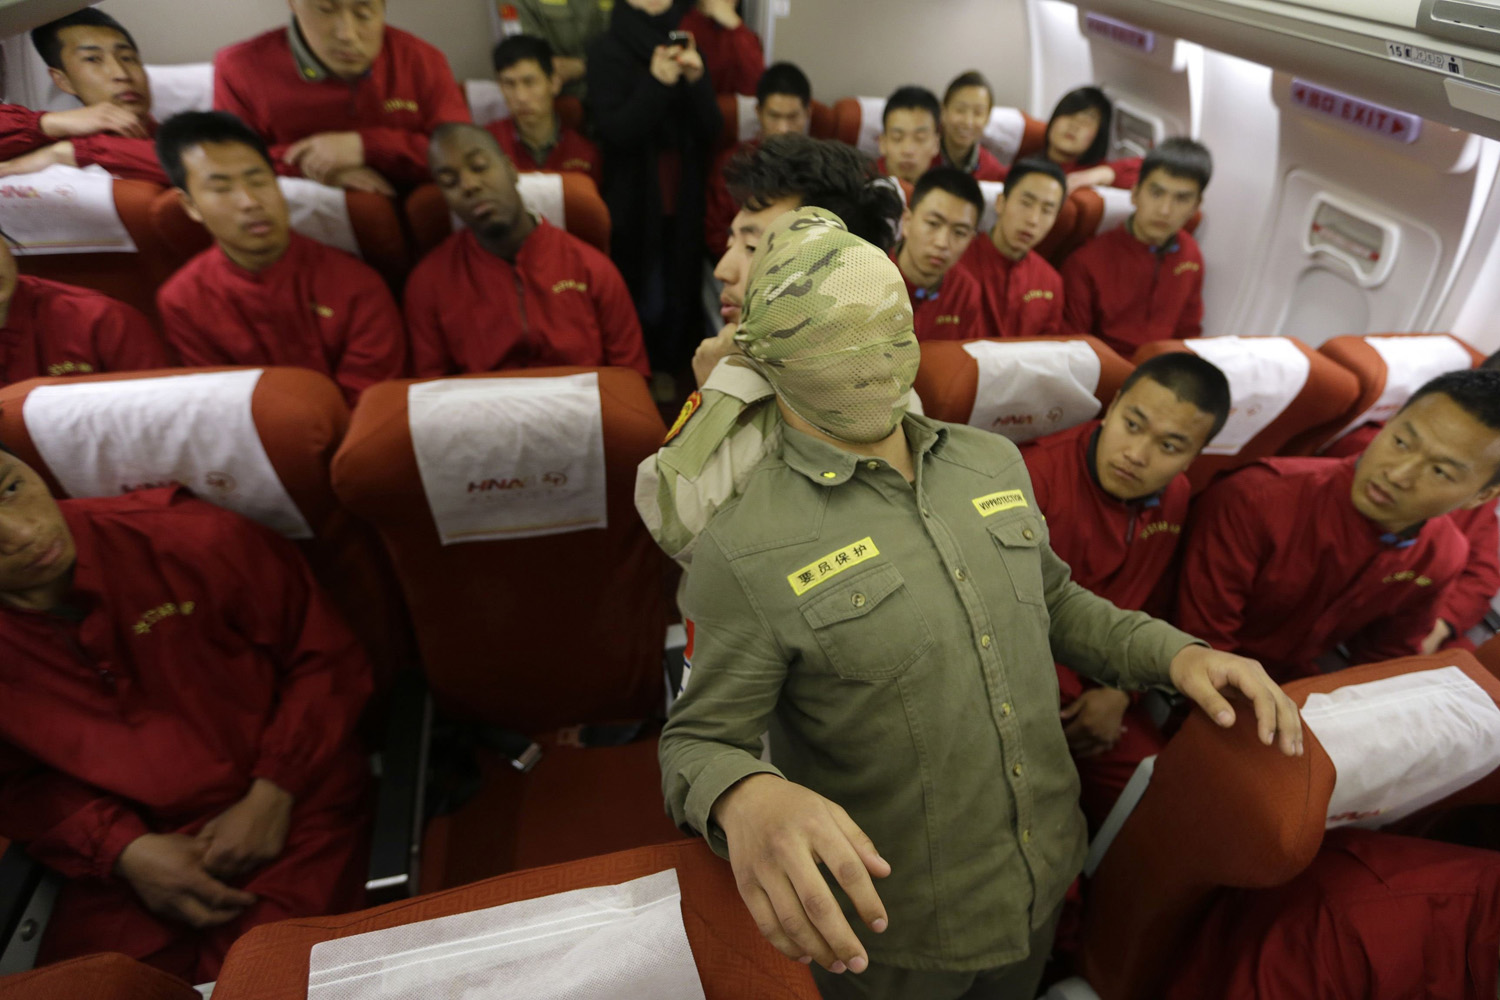 Mar. 18, 2014.Trainees watch a demonstration of close-quarter combat skills at a special course on flight safety inspired by the missing Malaysia Airlines Flight MH370.